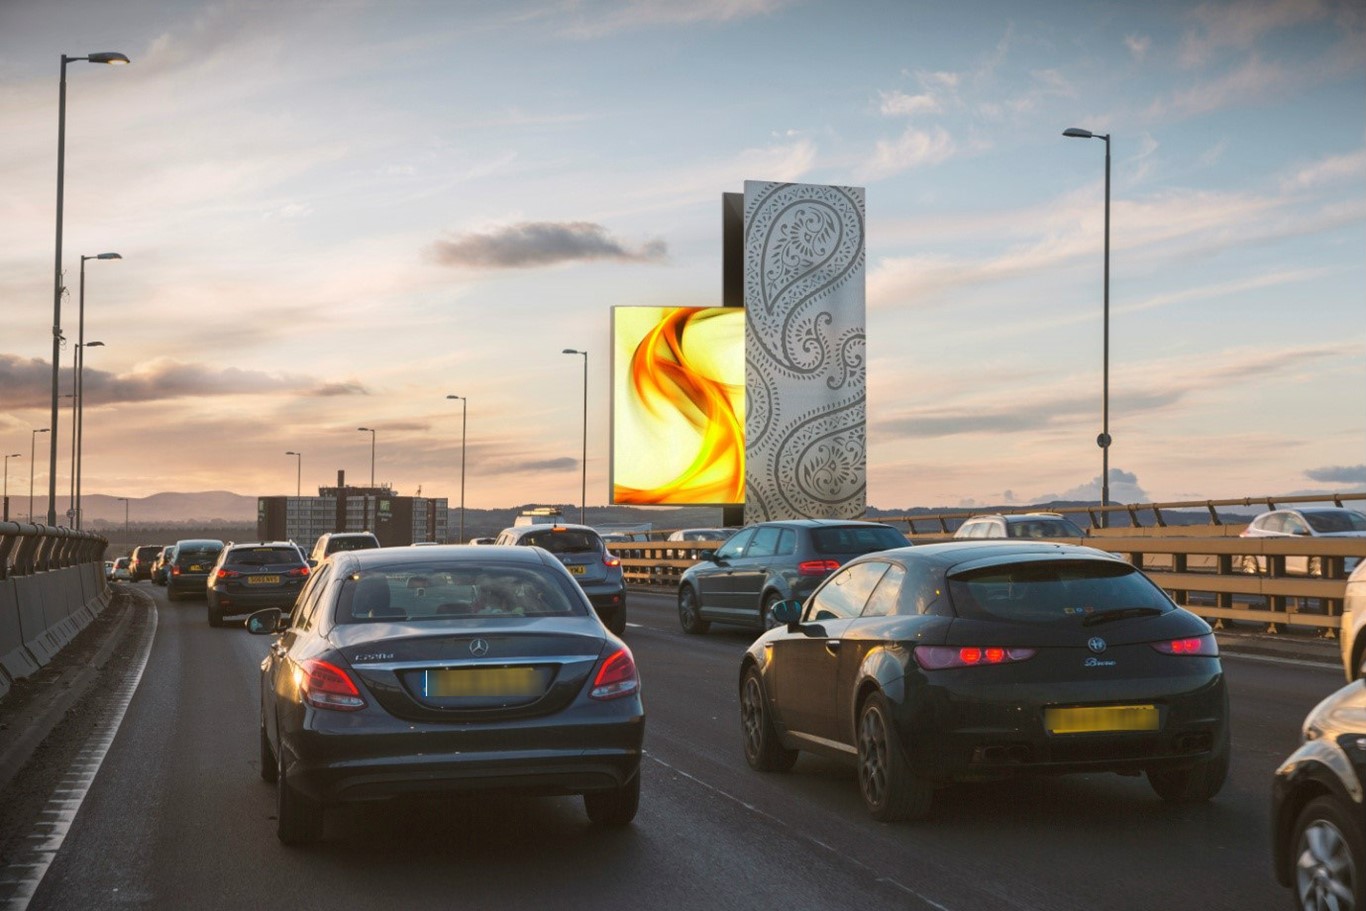 Work to build Scotland's tallest advertising tower on the side of its busiest motorway is underway.